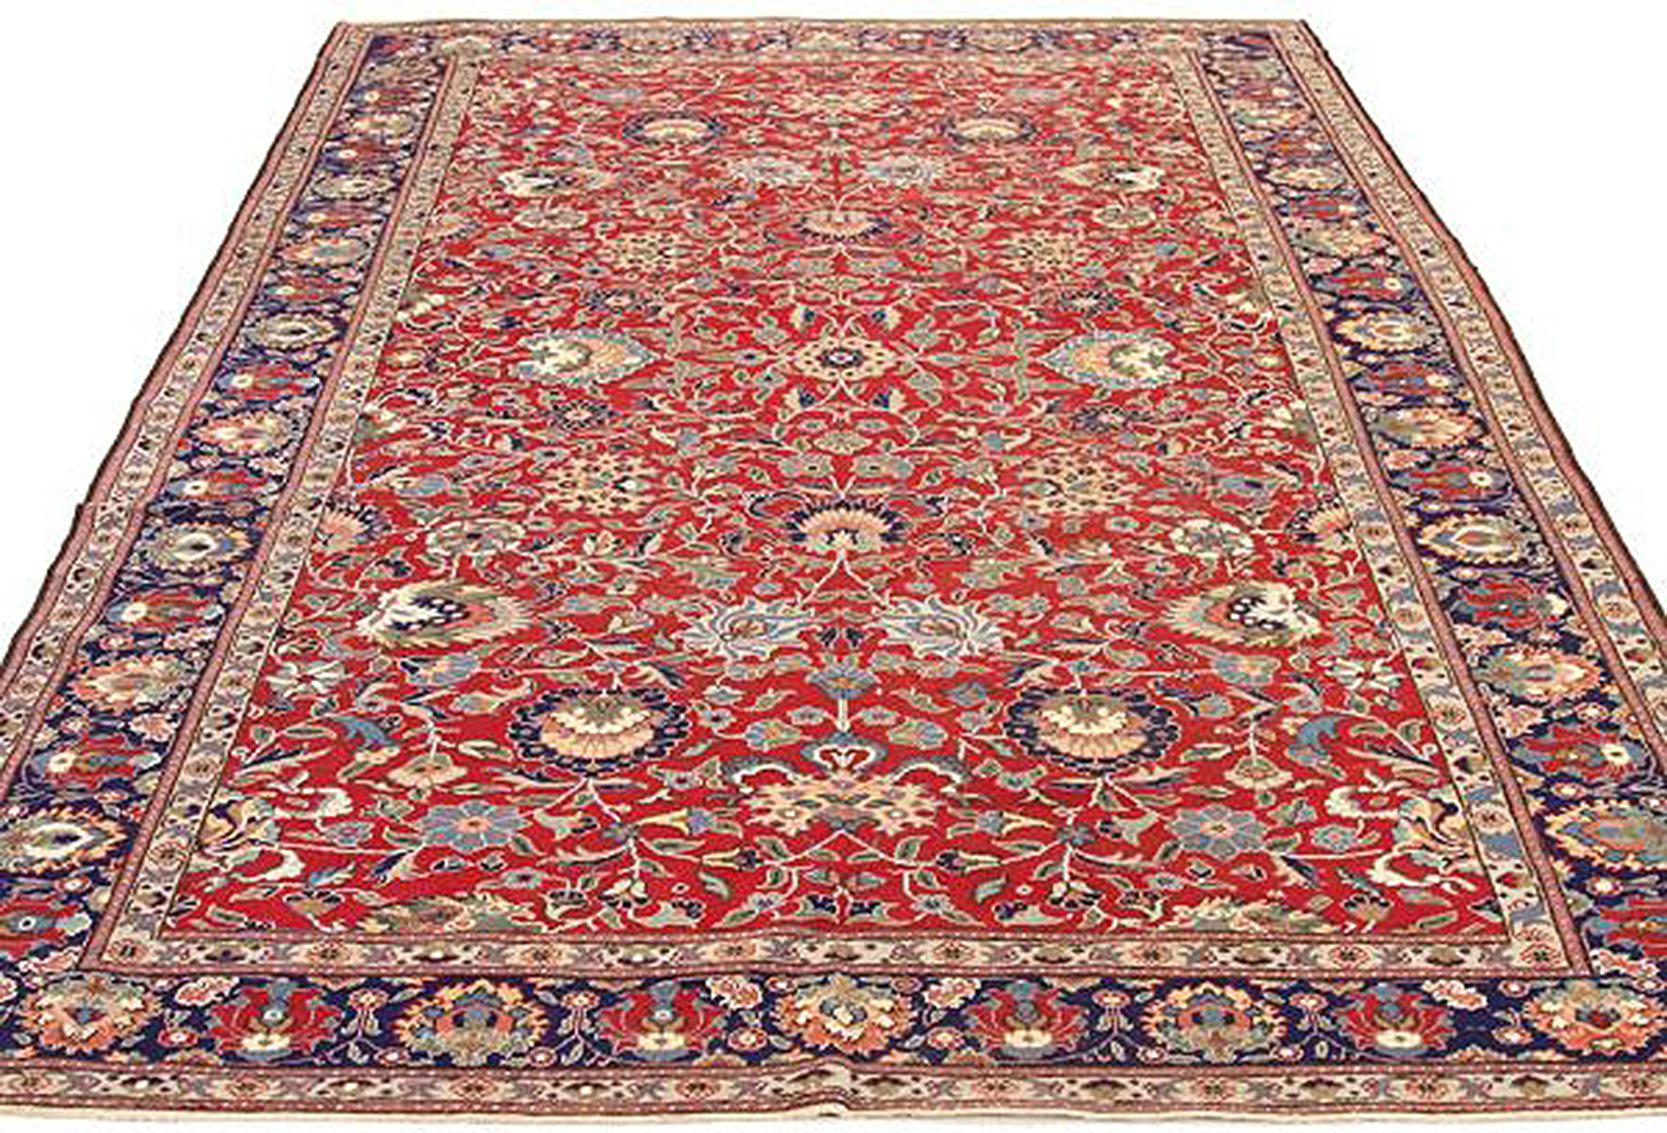 Persian 1920s Turkish Sivas Rug with Navy and Gray Floral Motifs on Red Field For Sale